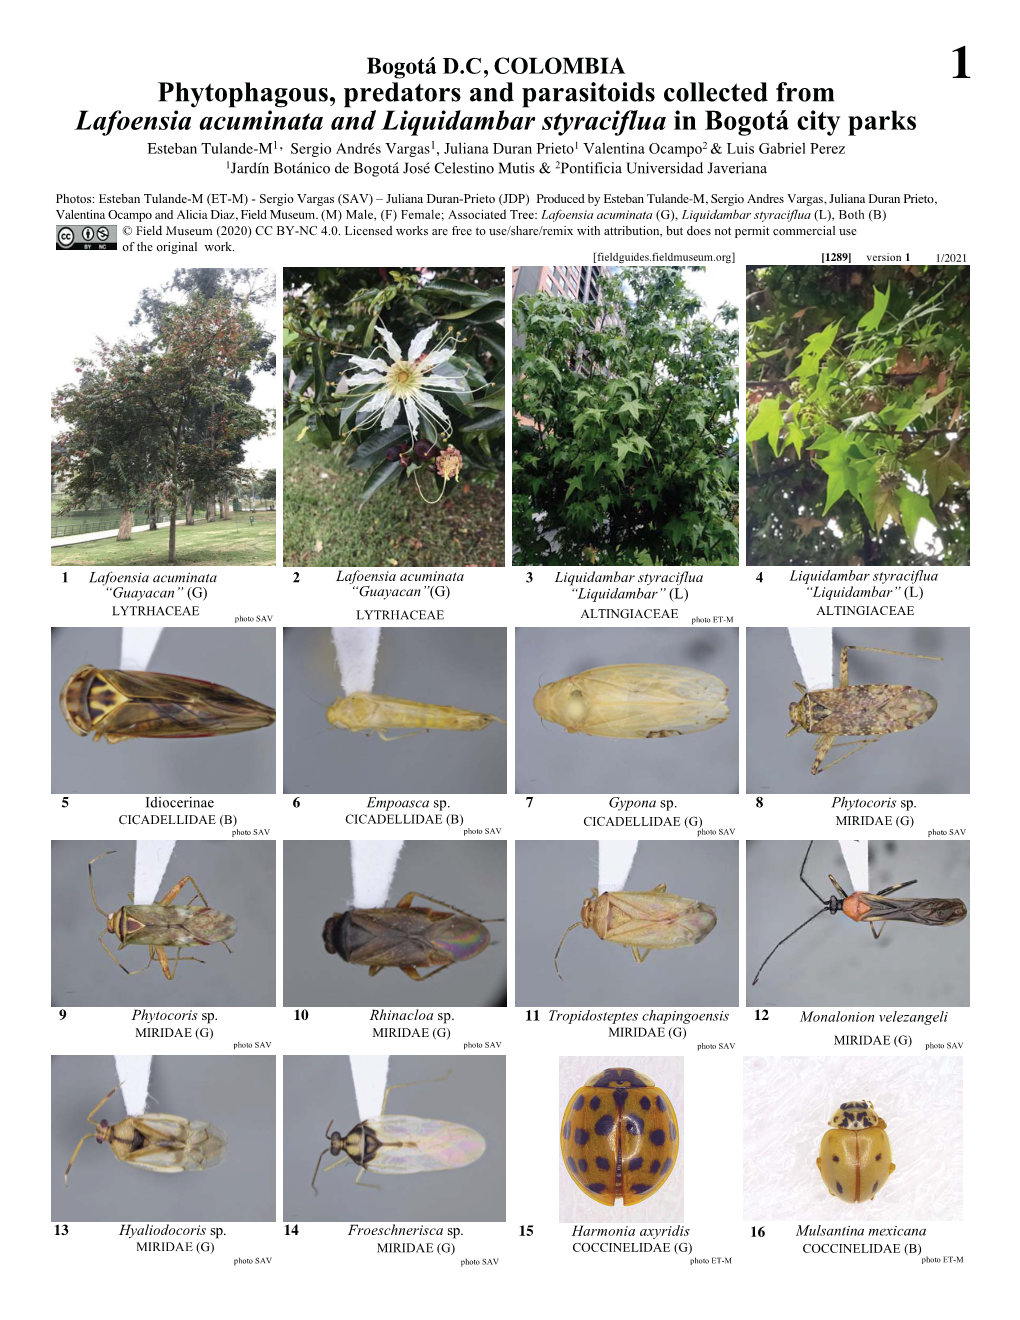 Phytophagous, Predators and Parasitoids Collected From